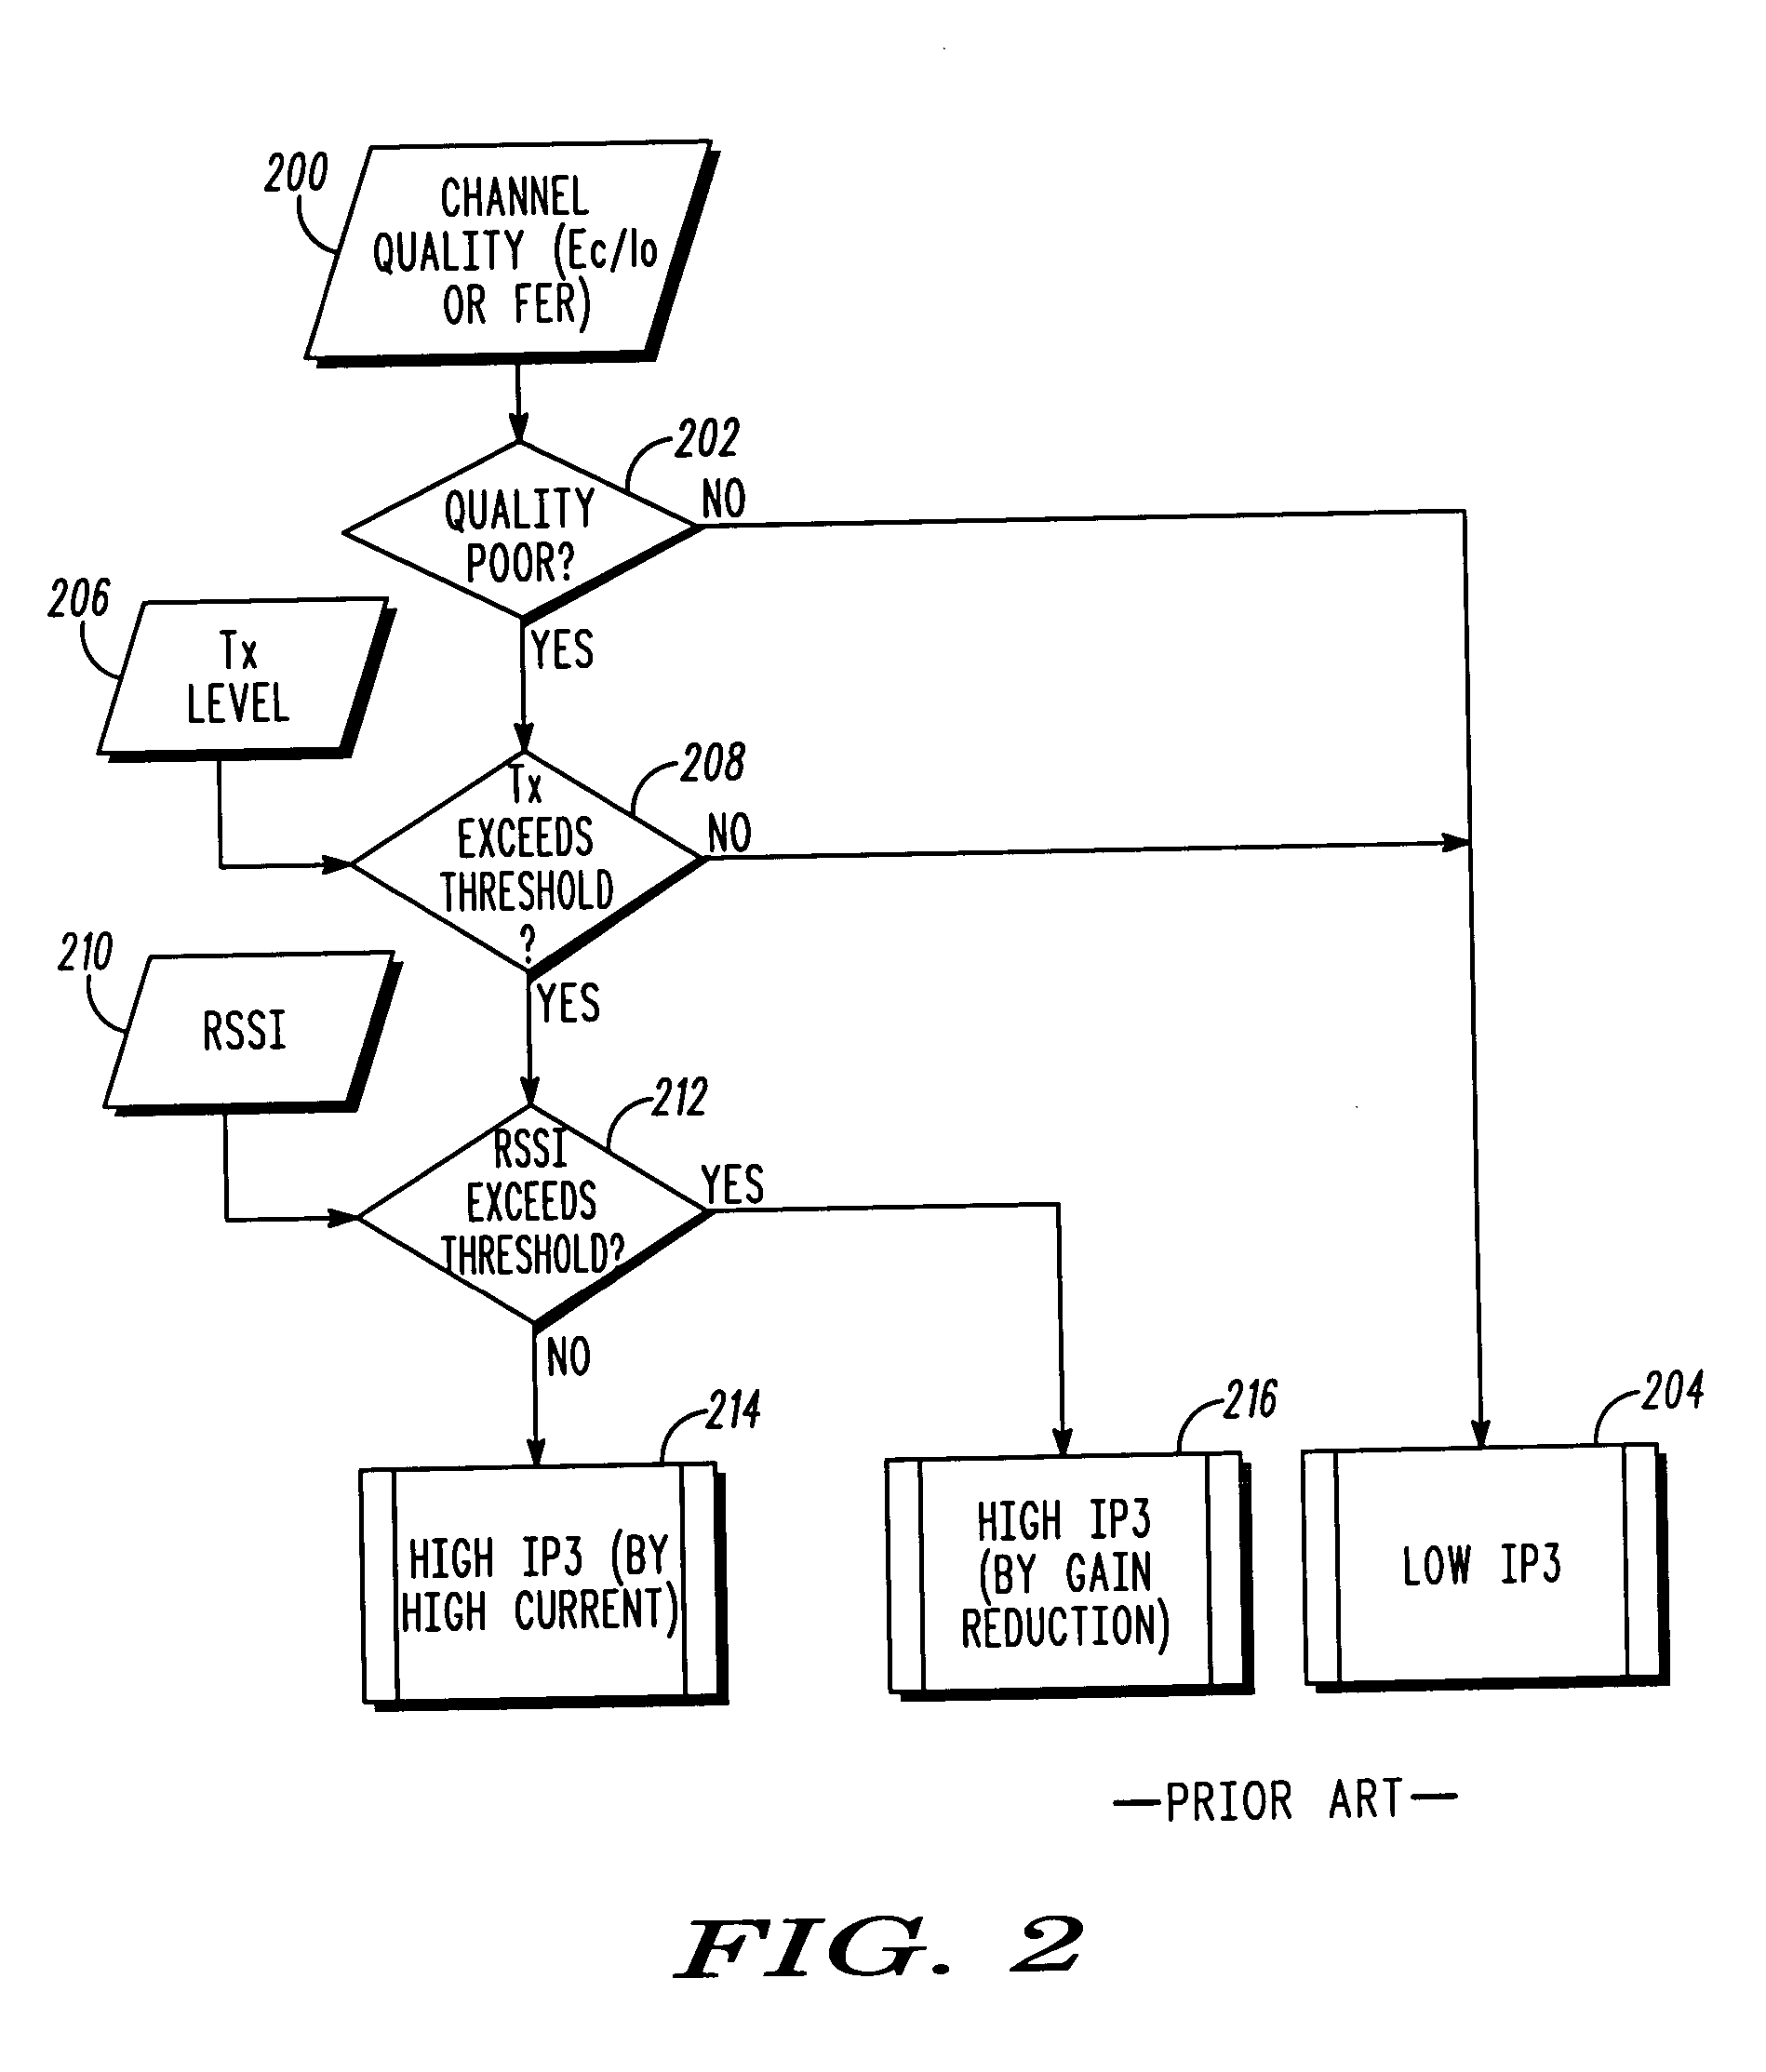 Current reduction by dynamic receiver adjustment in a communication device